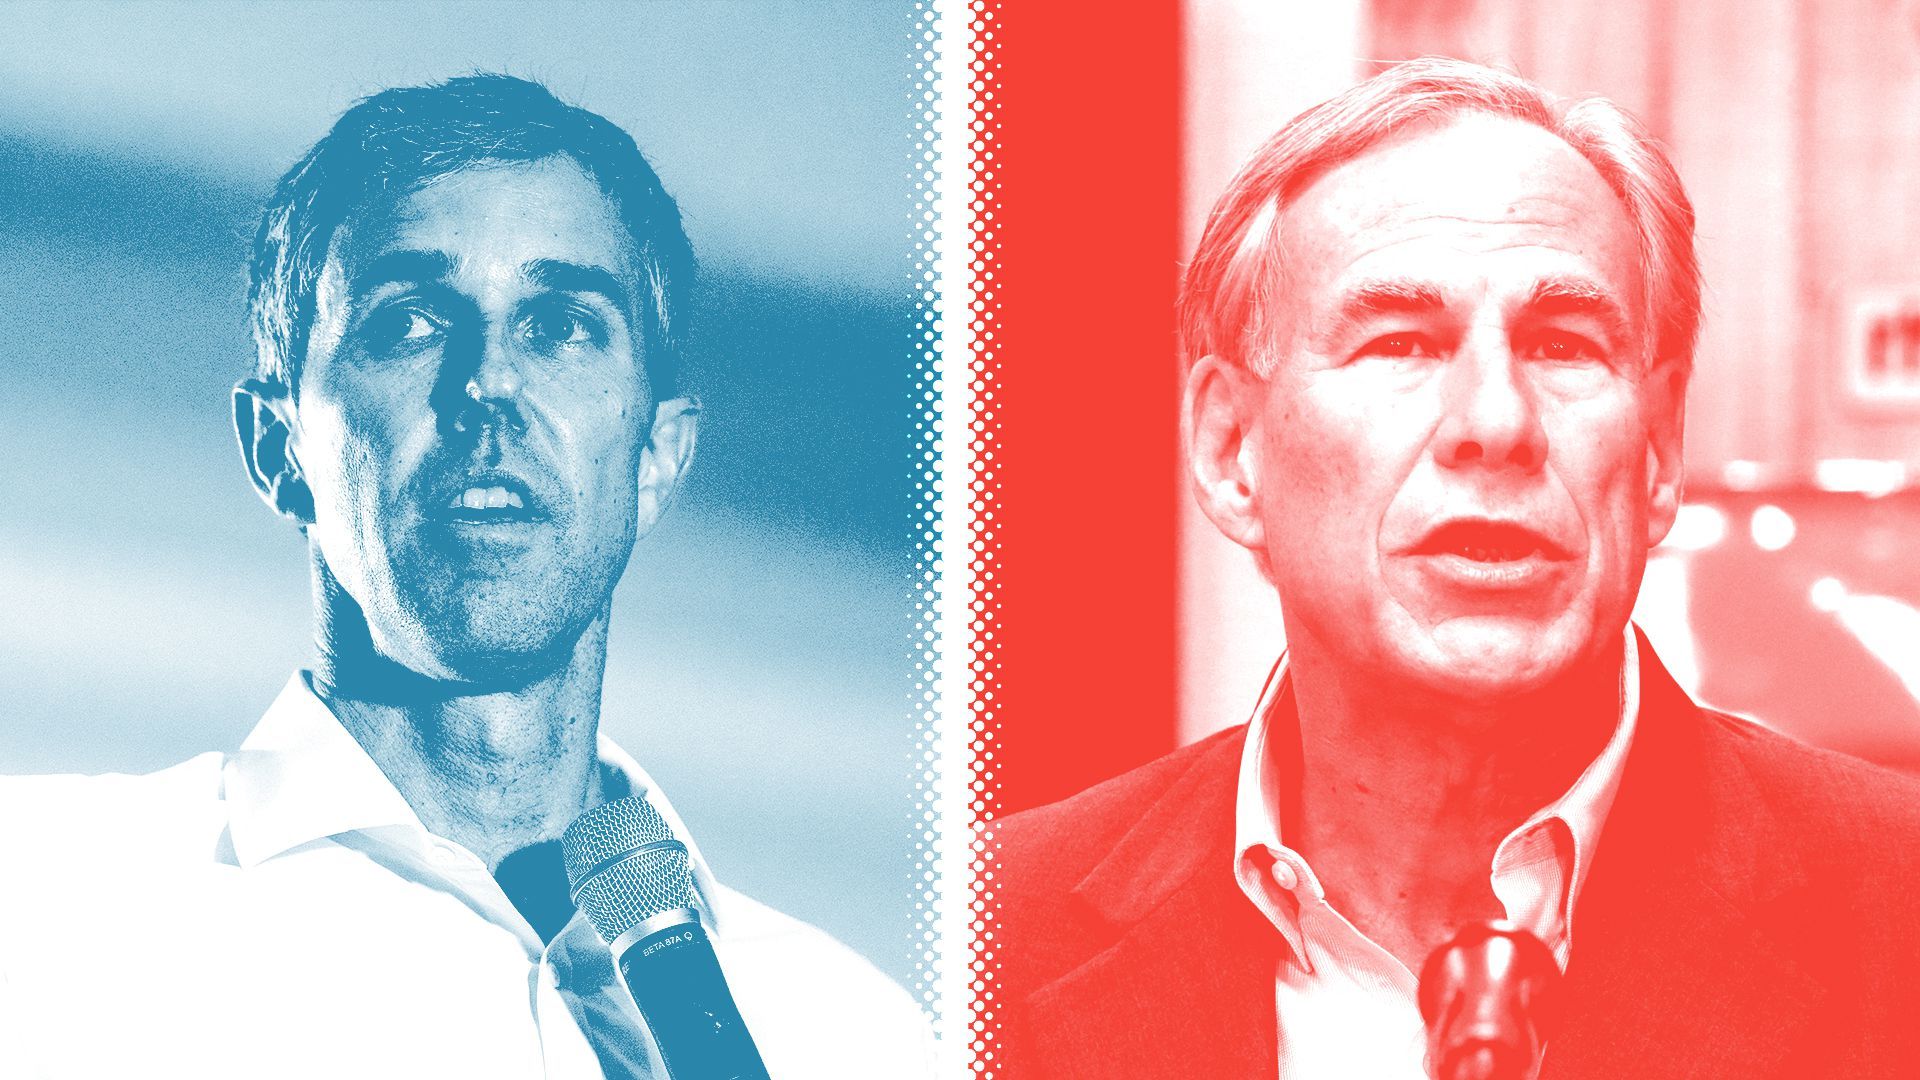 Photo illustration of Beto O'Rourke tinted blue and Greg Abbott tinted red separated by a white halftone divider.